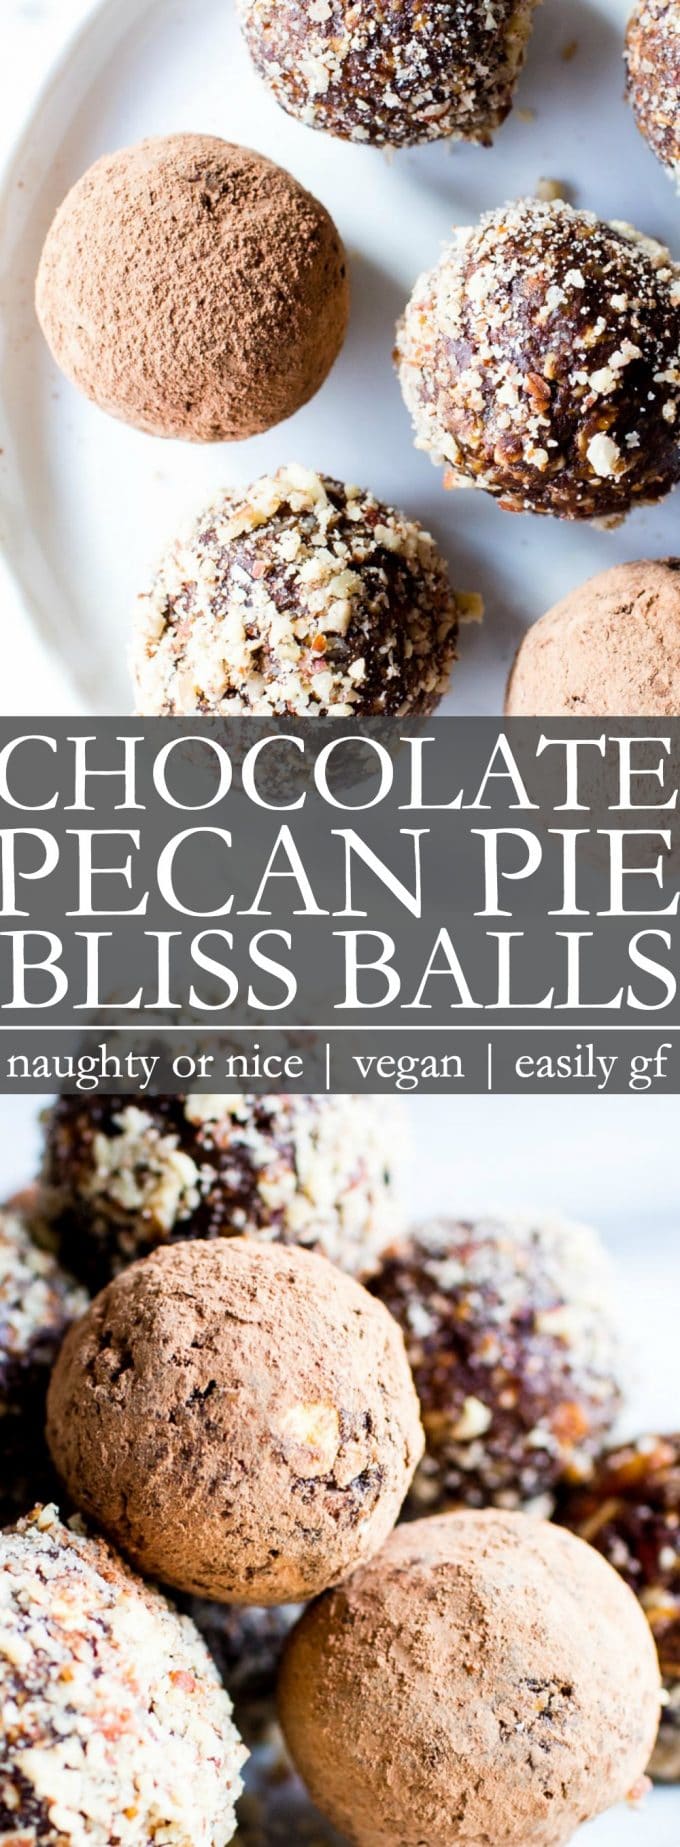 Pinterest pin for chocolate pecan pie bliss balls with two images: 1. bliss balls overhead. 2. bliss balls stacked tall. 